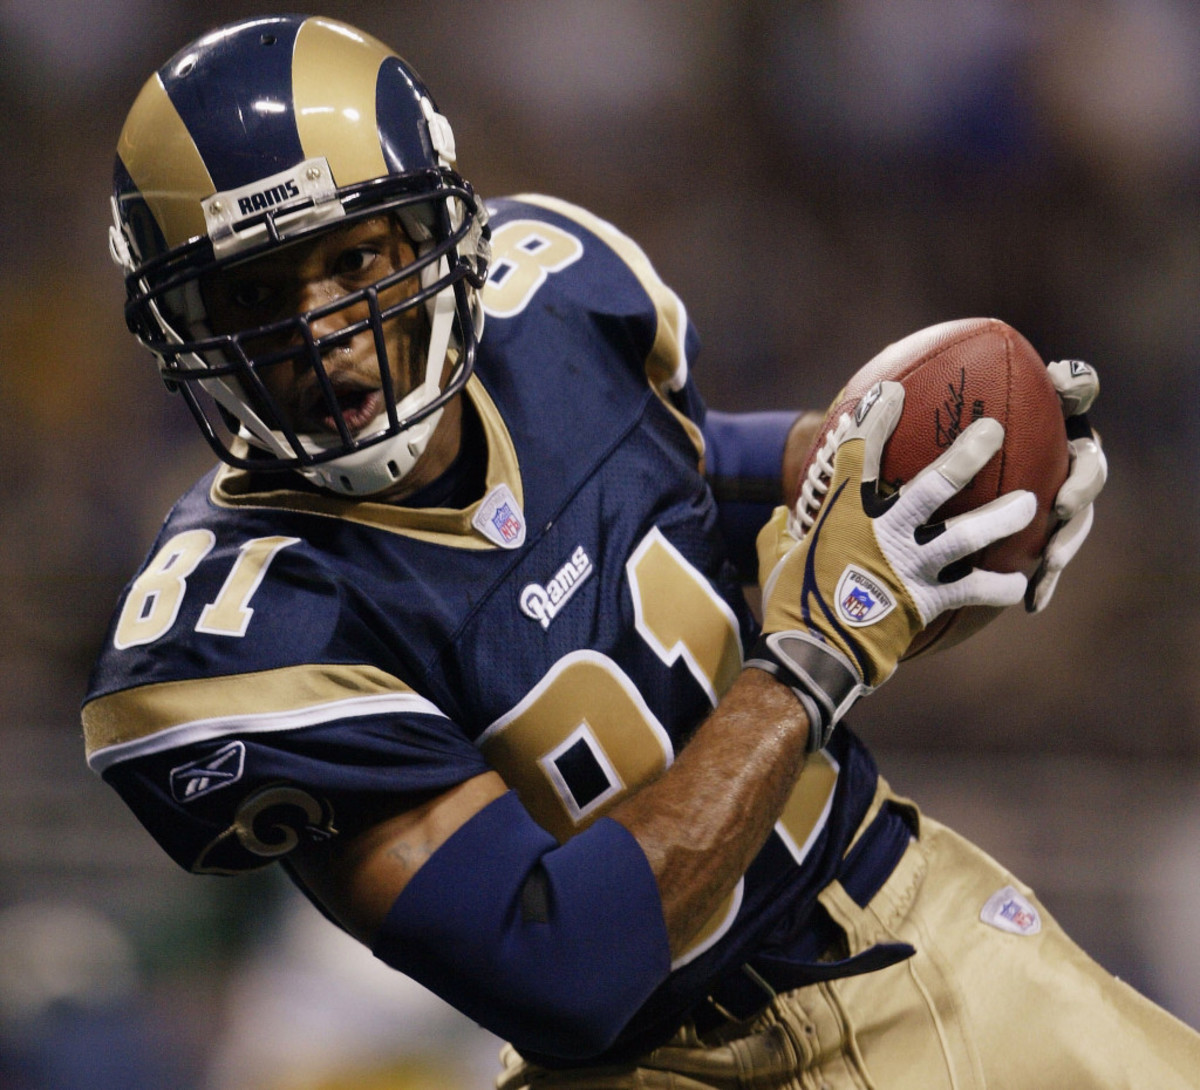 No receiver in history had more receptions or yards in the 2000s than Terry Holt.